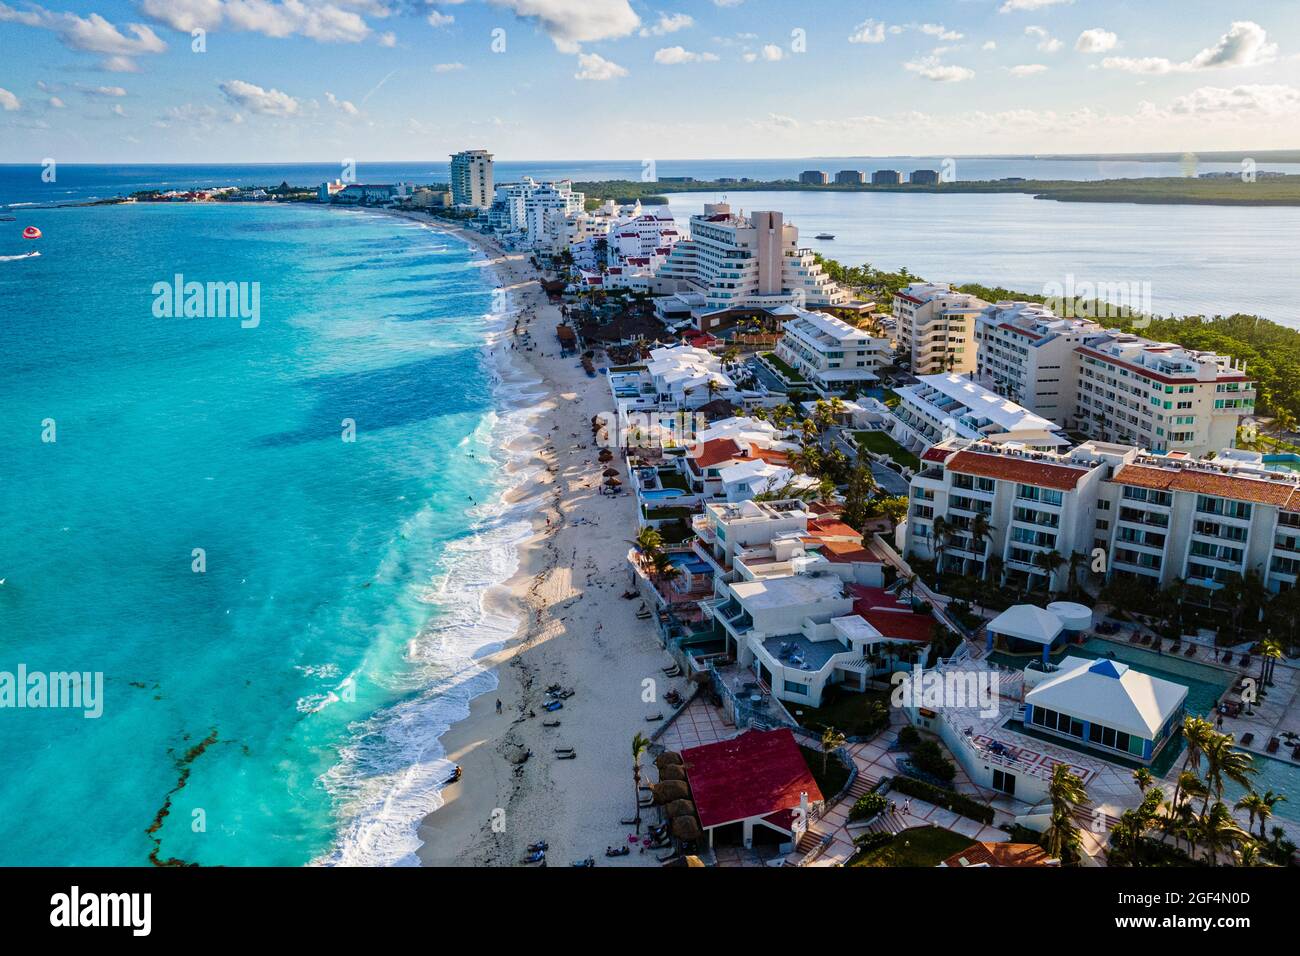 Mexico, Quintana Roo, Cancun, Aerial view of coastal city surrounded by blue waters of Caribbean Sea Stock Photo